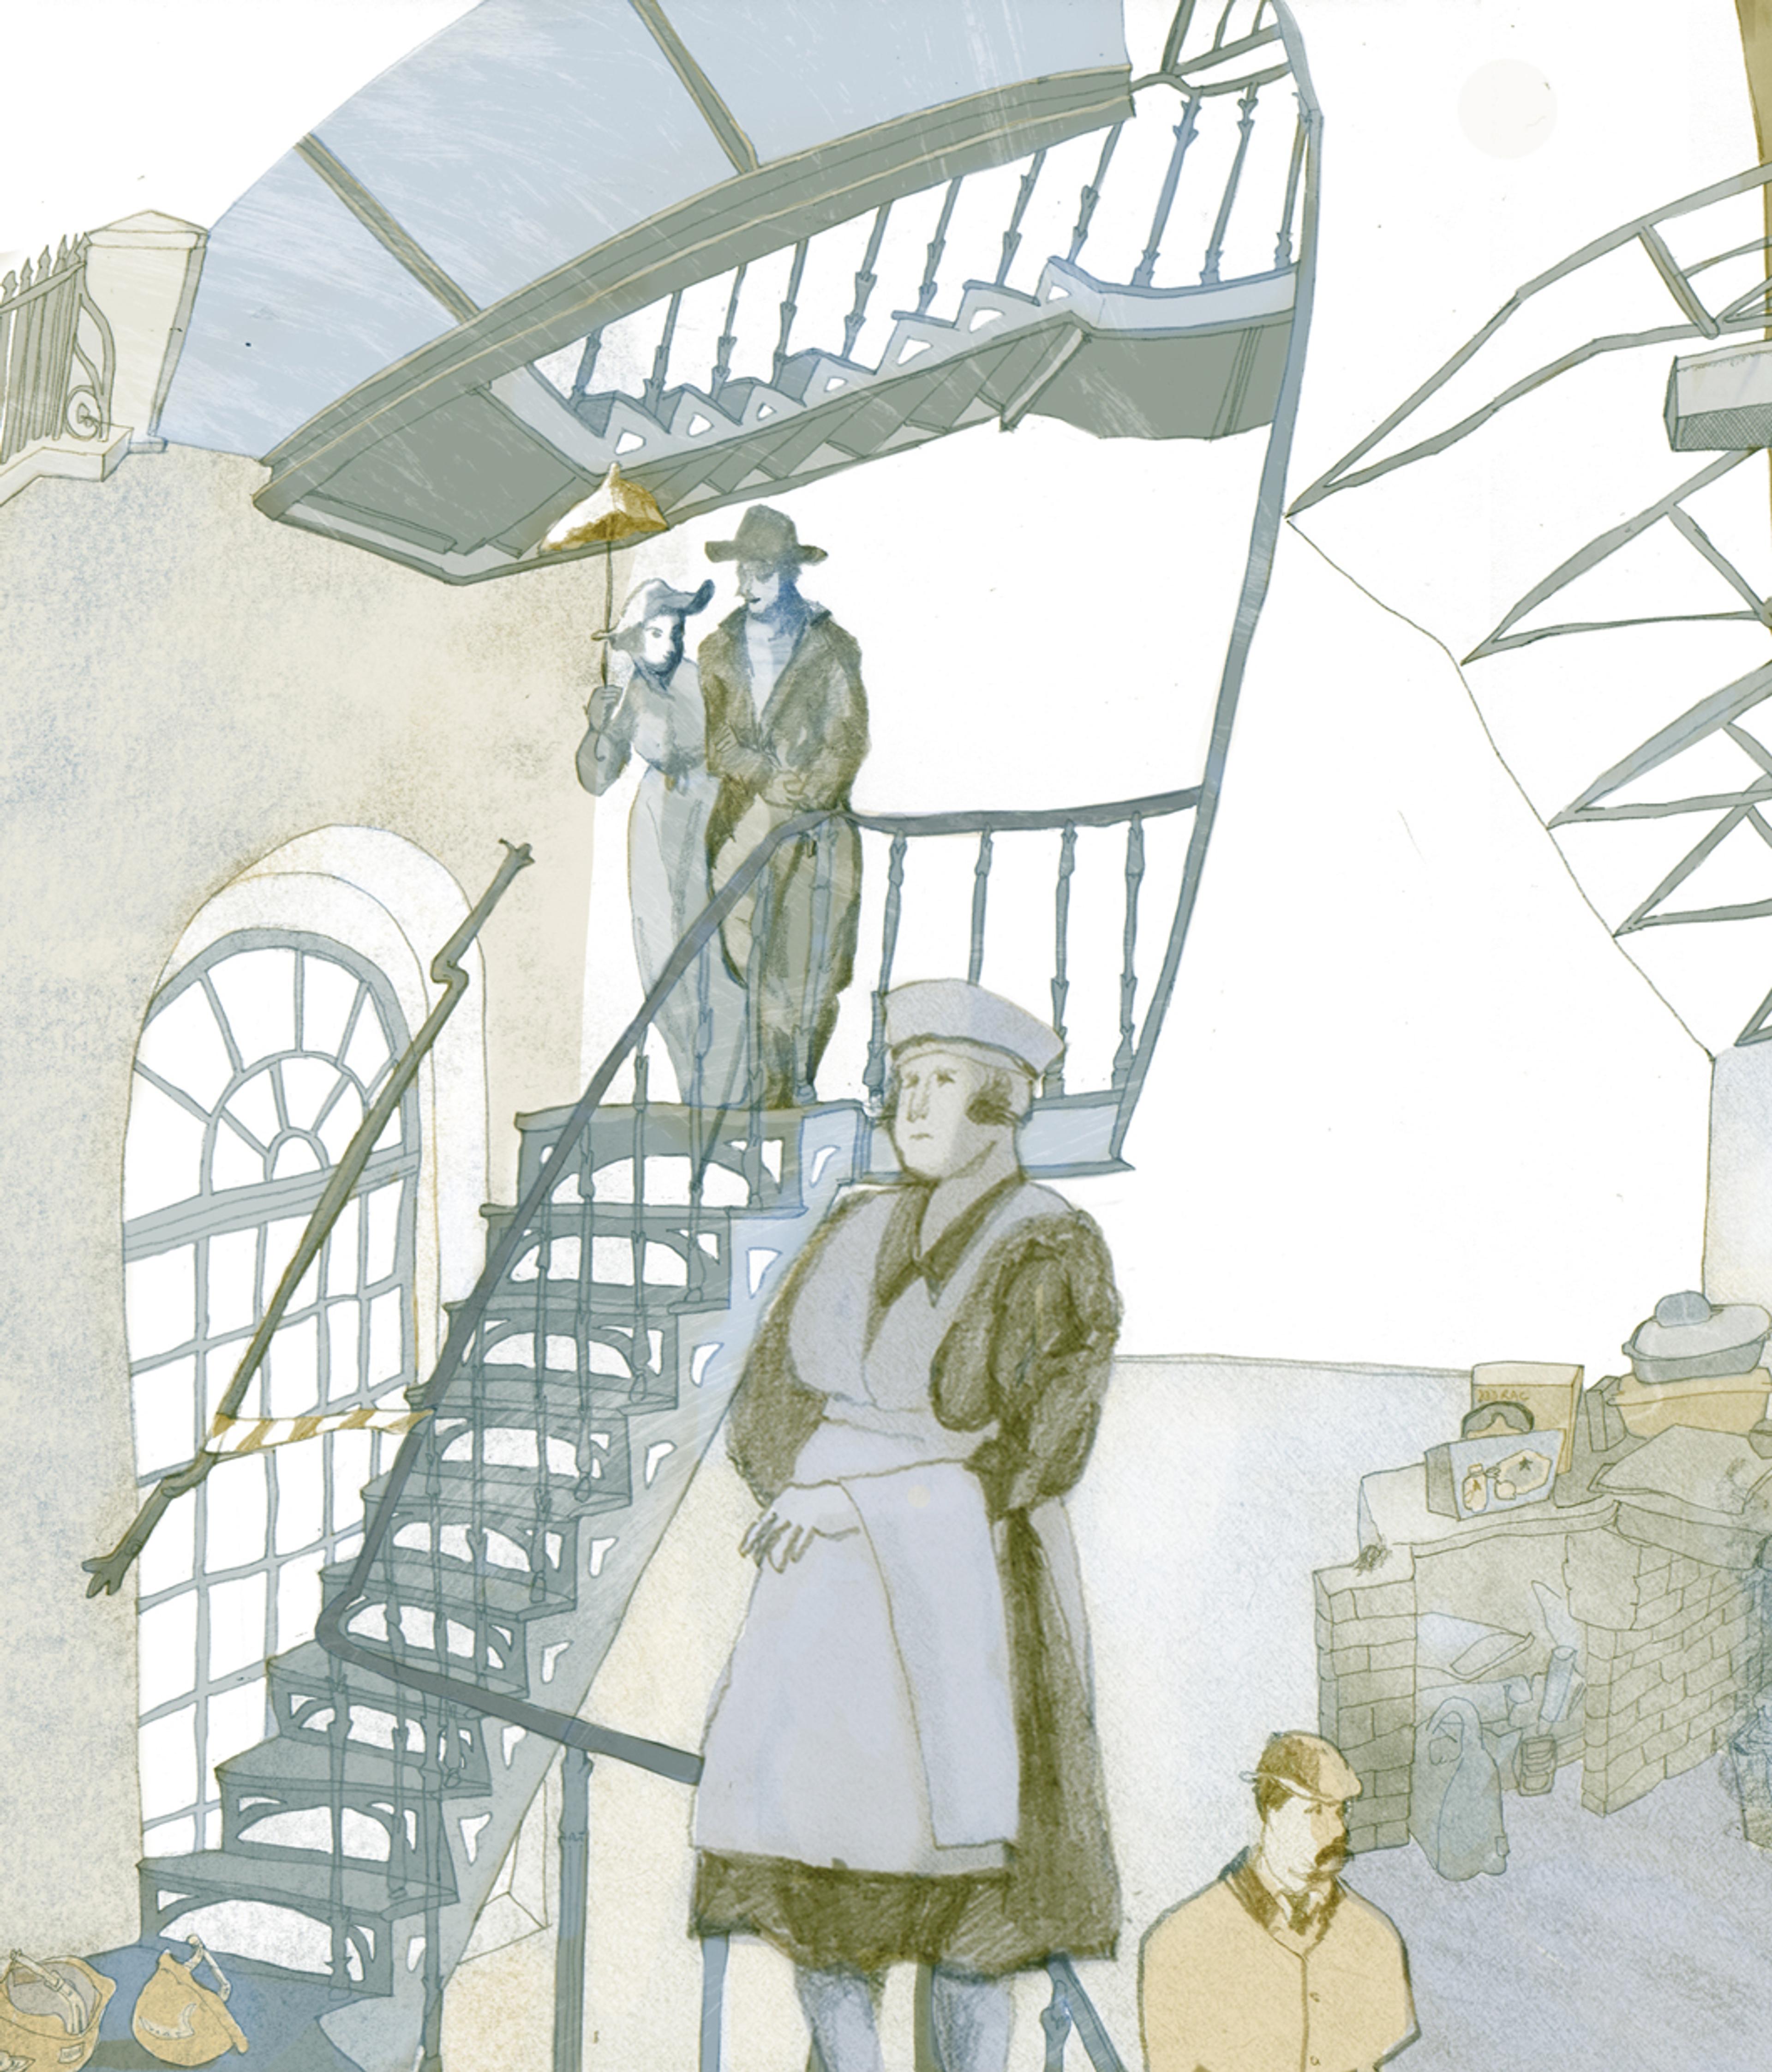 Illustration of industrial interior with people working wearing clothes from different eras